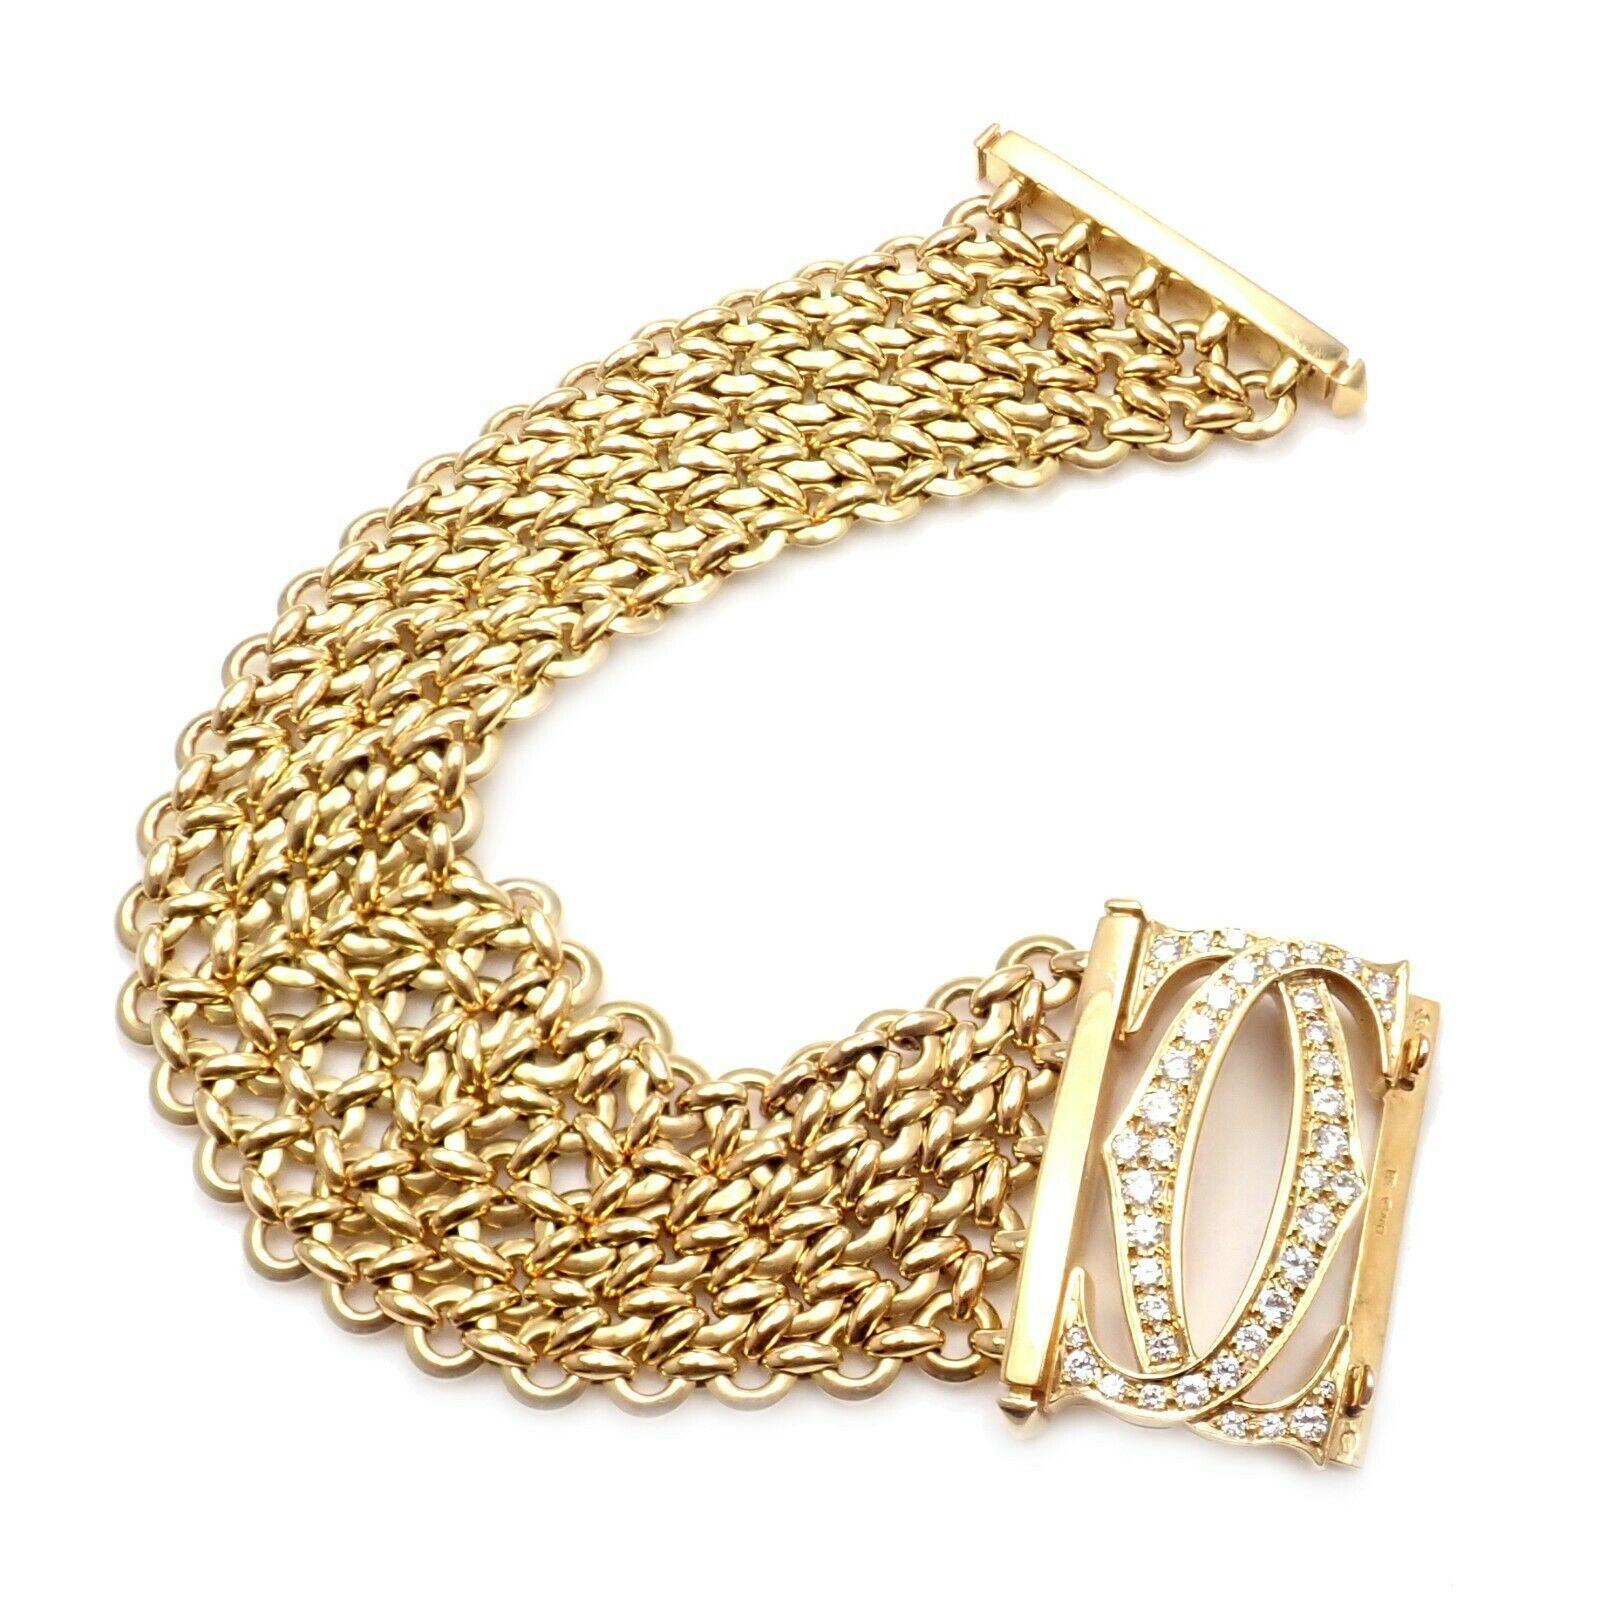 18k Yellow Gold Penelope Double C Diamond Five Row Bracelet by Cartier. 
With 42 round brilliant cut diamonds, VVS1 clarity, F color. Total diamond weight: 1.70ct. 
This stunning bracelet comes with a Cartier box.
Details: 
Weight: 88.4